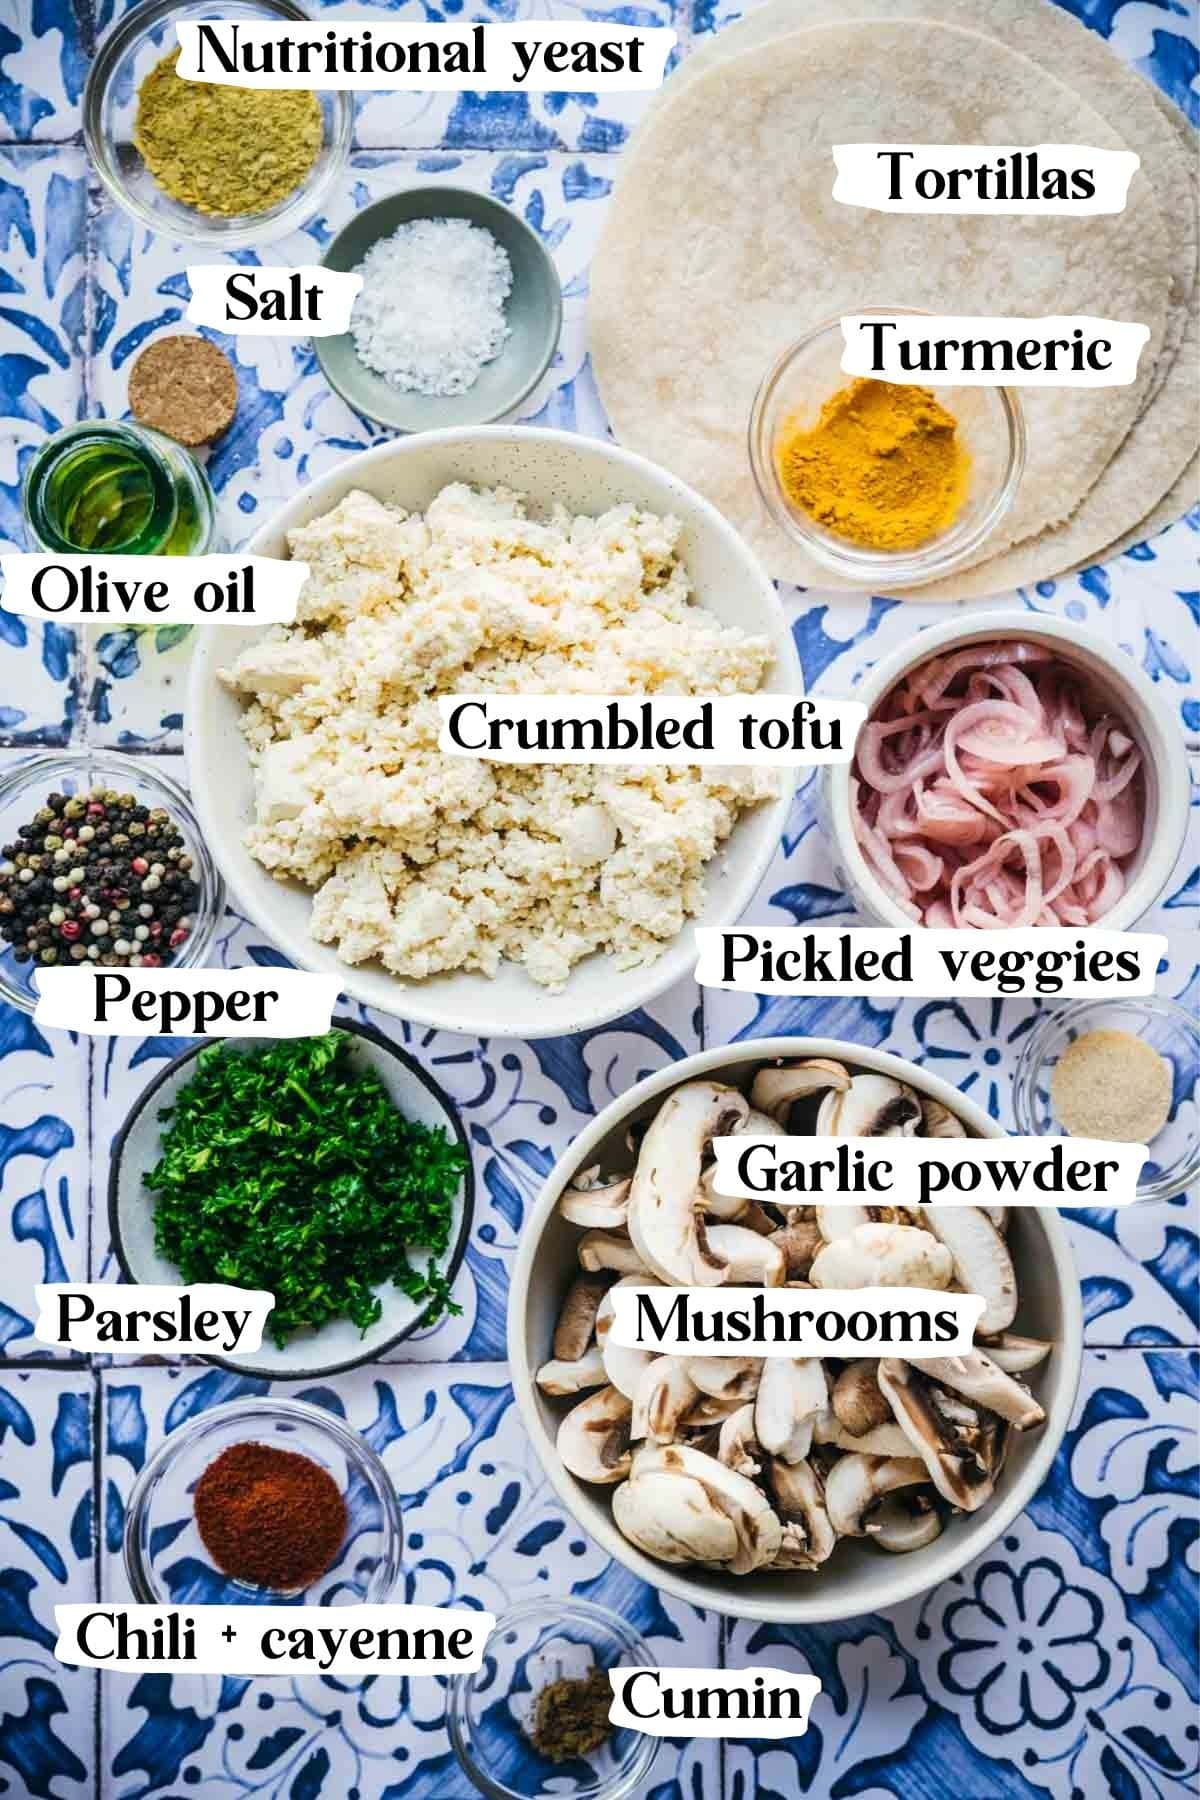 Picture of all the ingredients used in this recipe, including tofu, mushrooms, spices, etc.